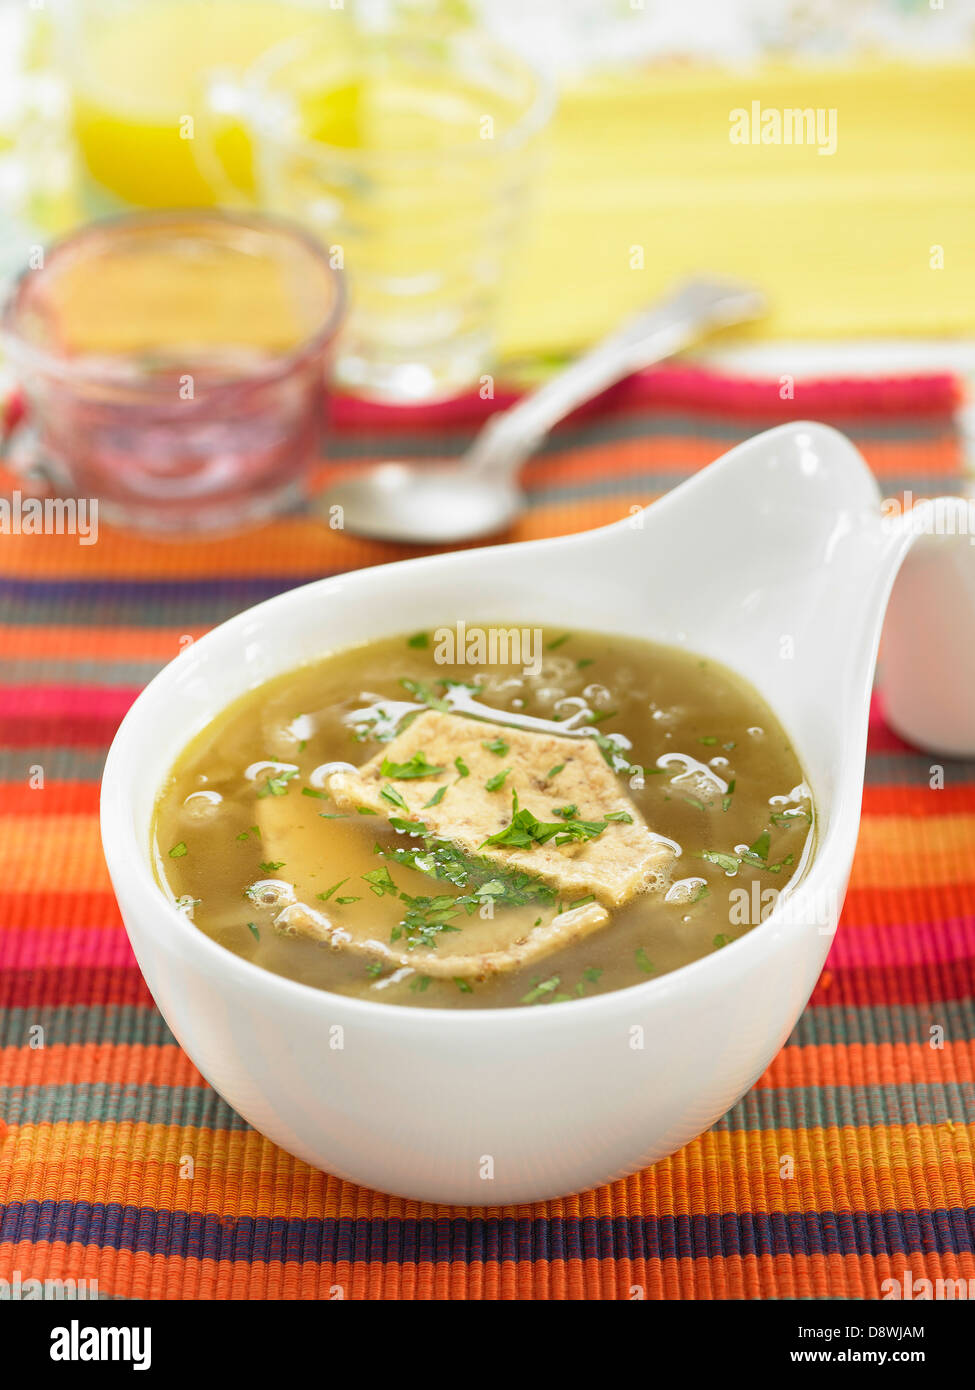 Vegetable and onion broth Stock Photo